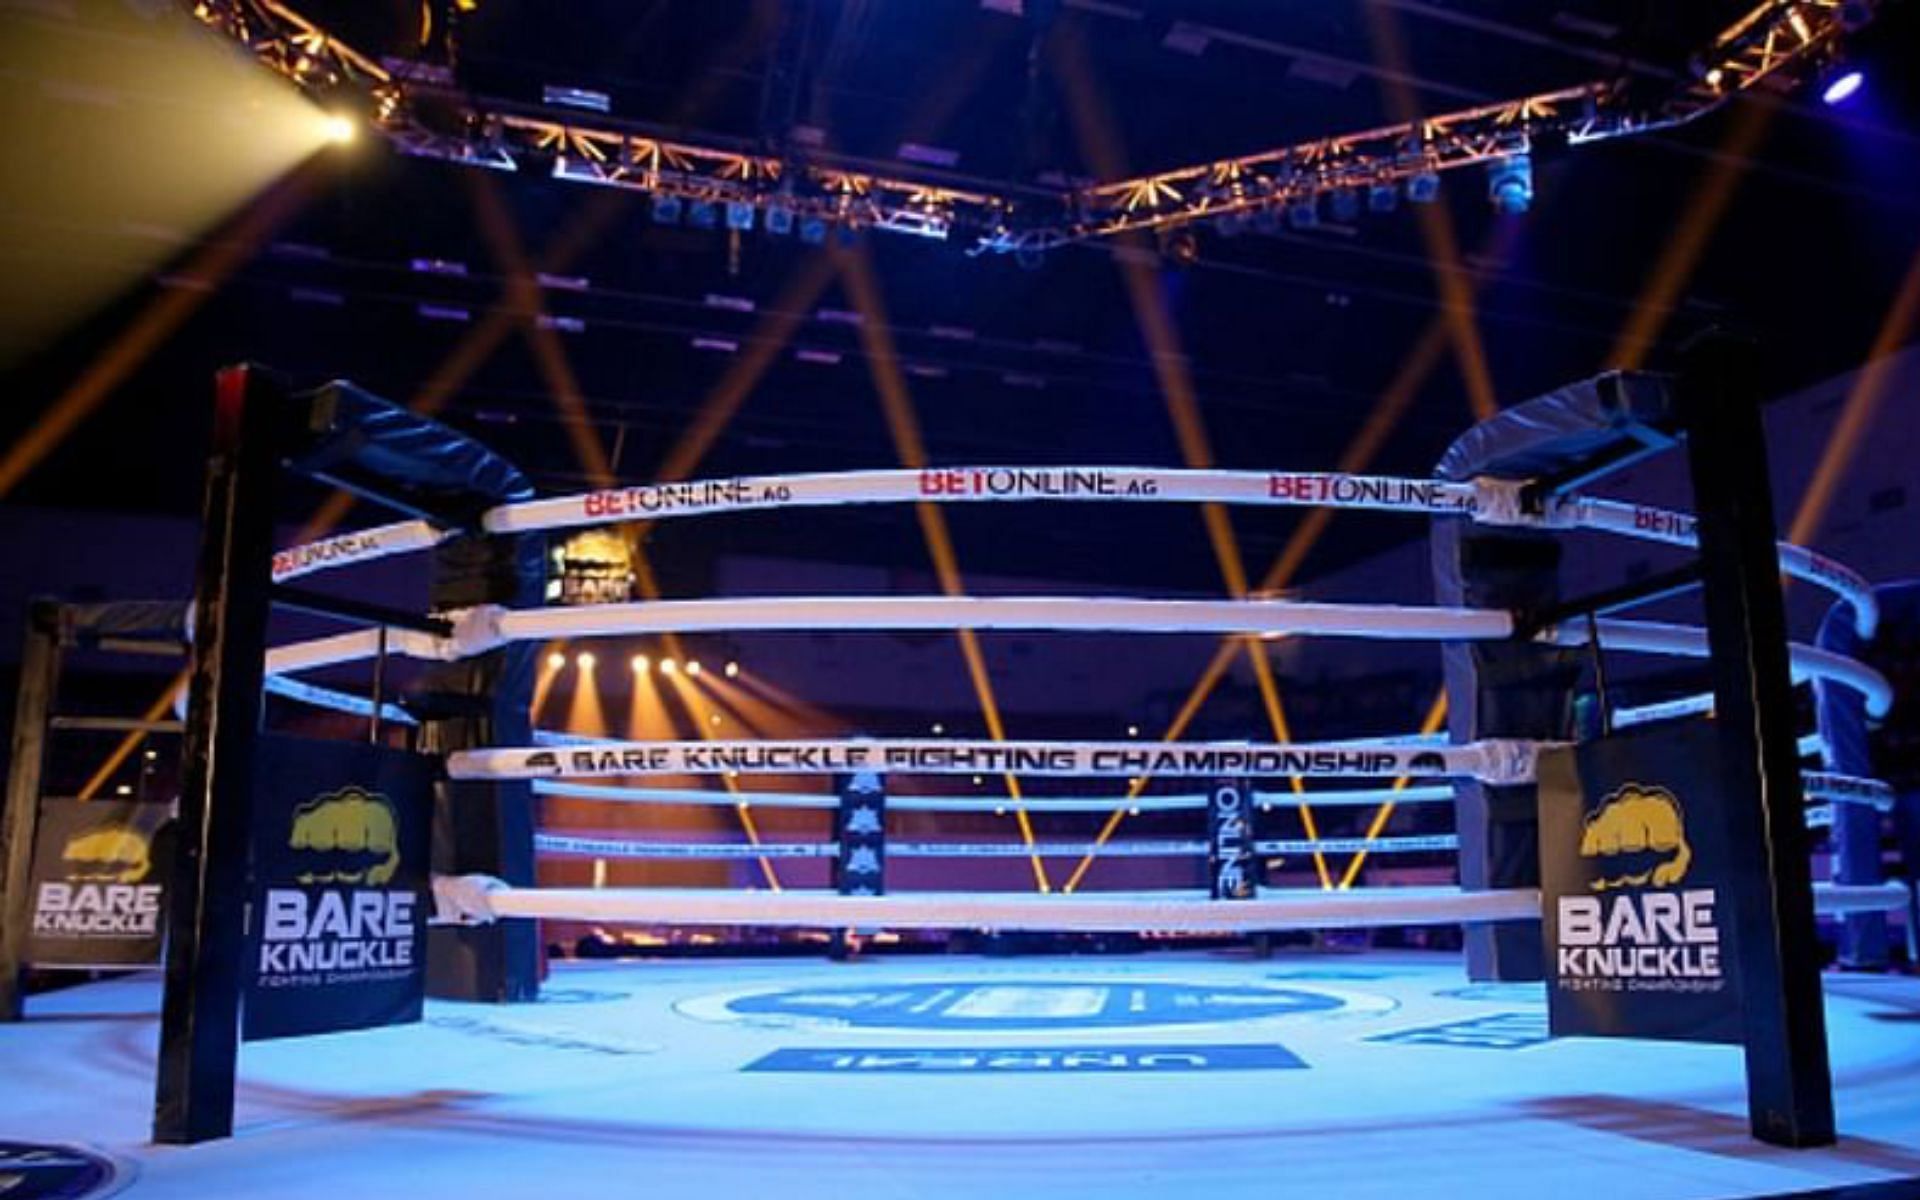 BKFC Stream BKFC stream Where can you watch/ re-watch Bare Knuckle Fighting Championship 48?